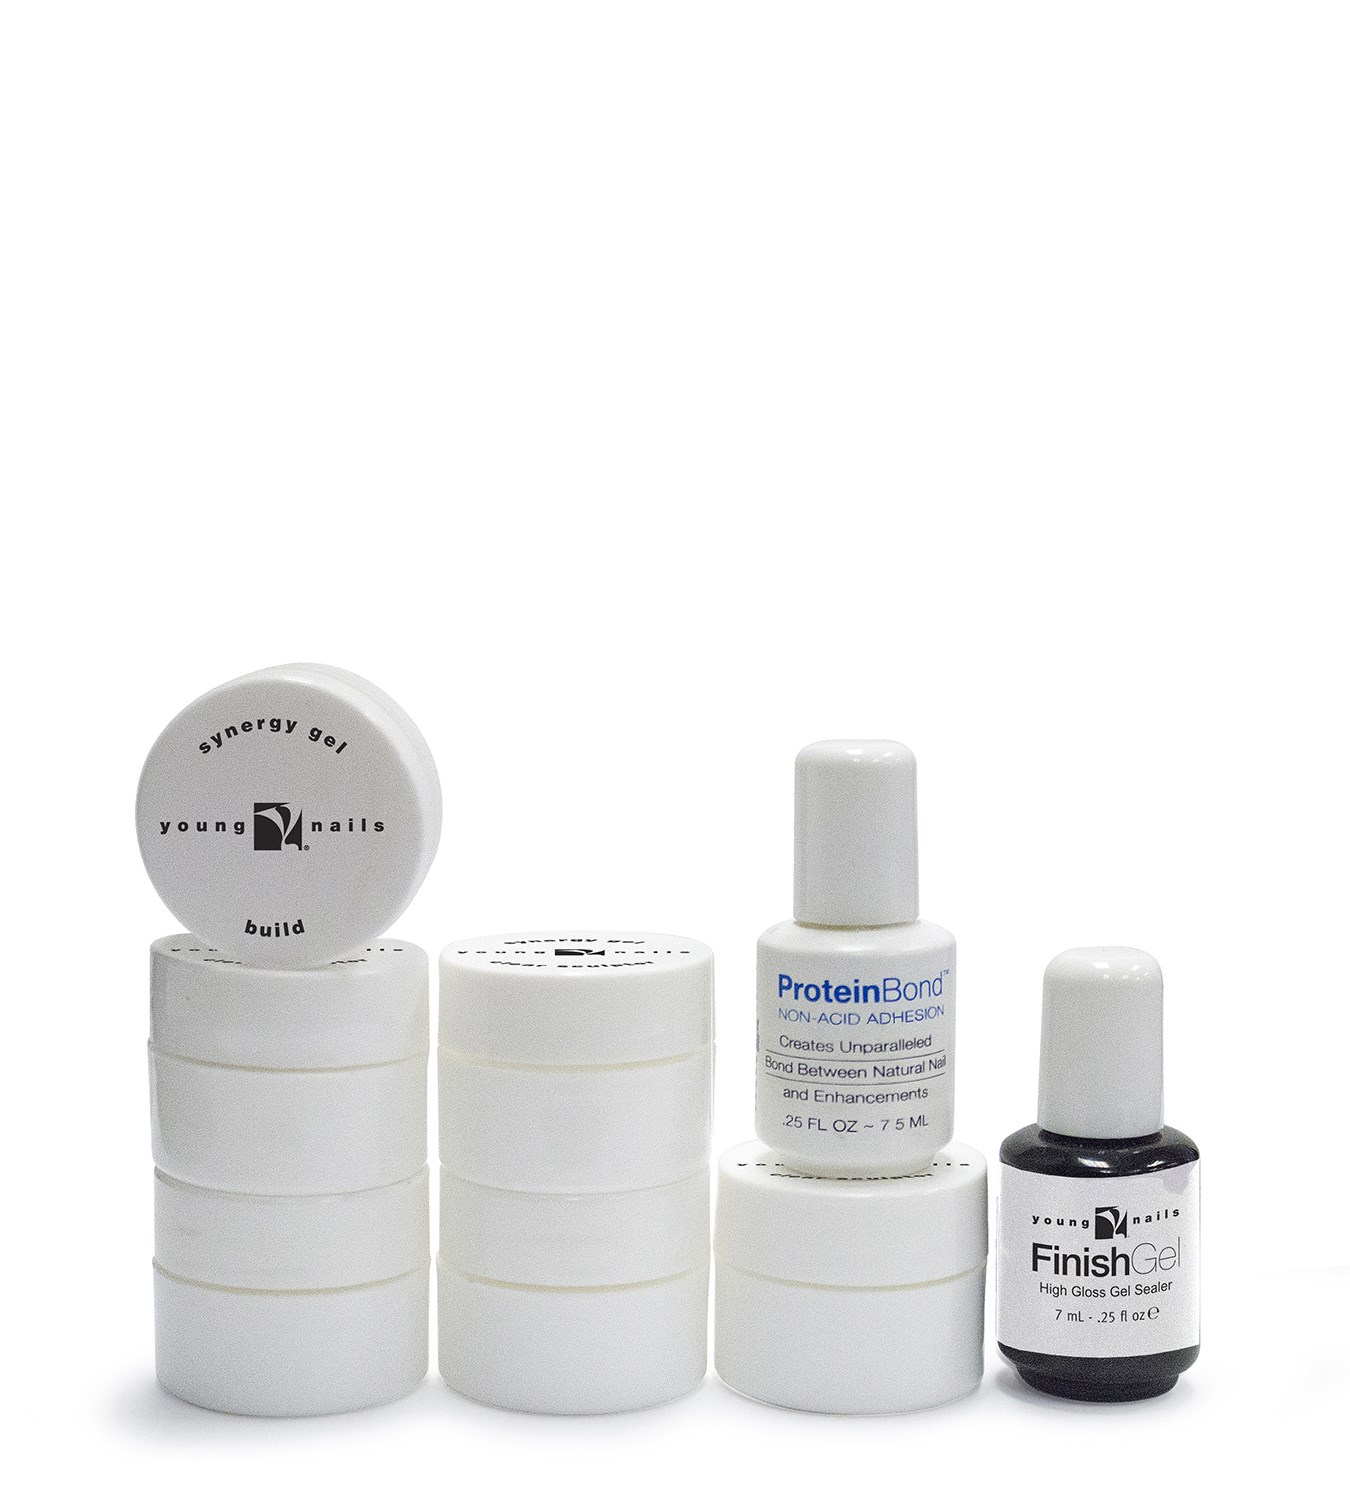 Young Nails - Trial Synergy Gel Kit - Click To View Page